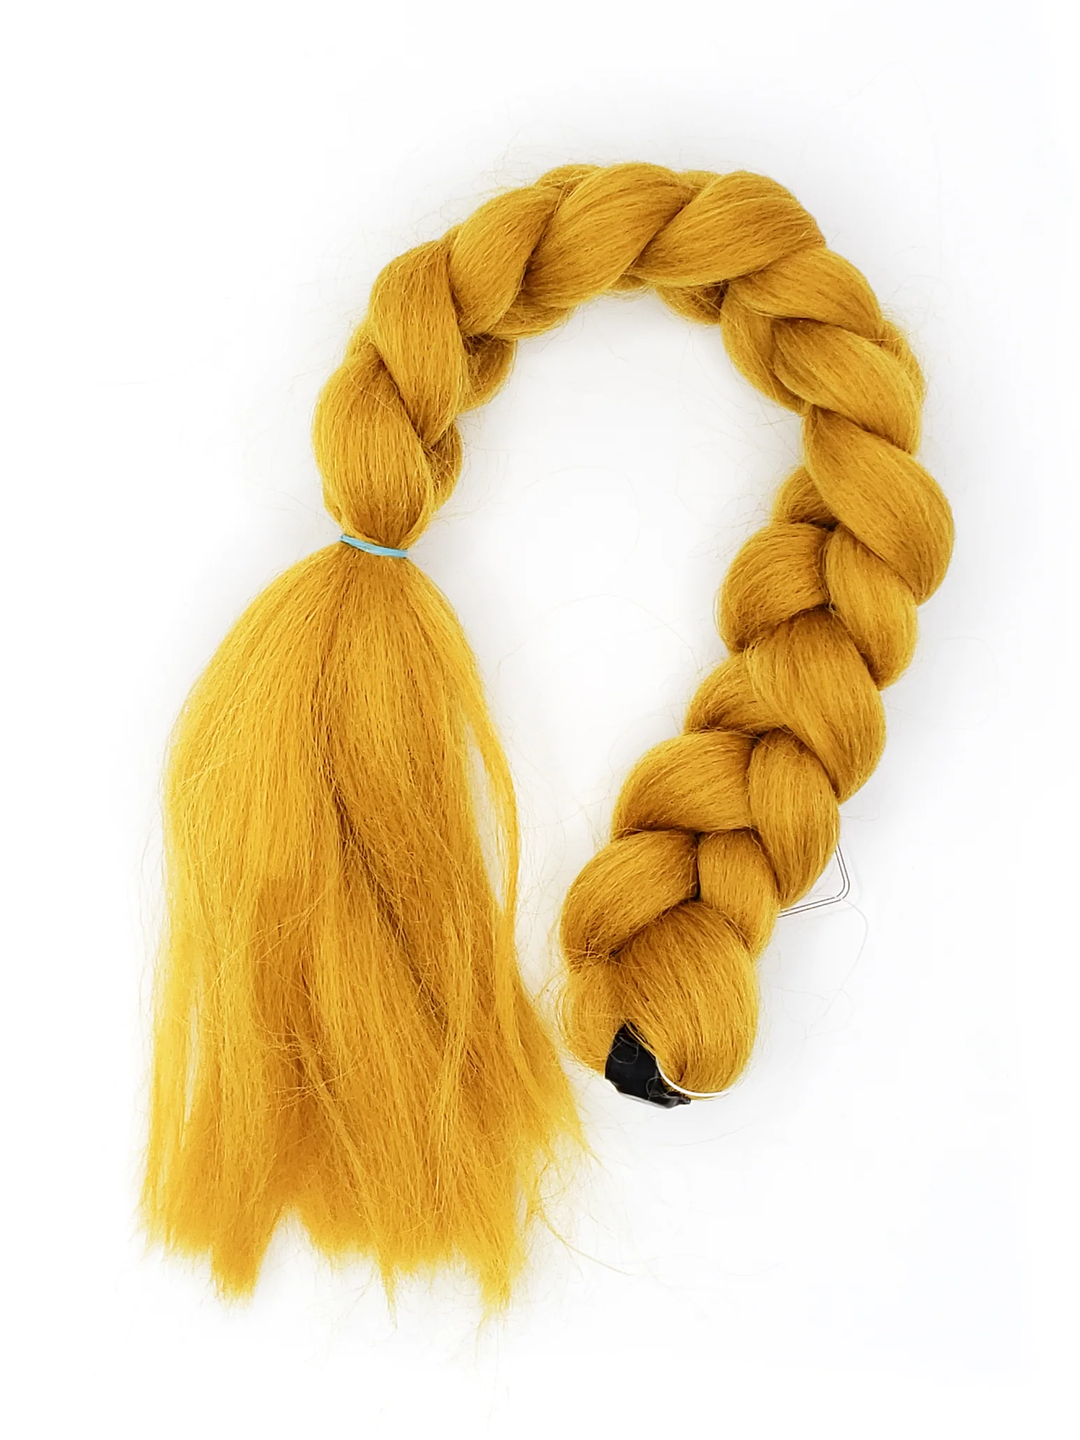 Crimped Hair Pieces For Latex Hoods with Magnet